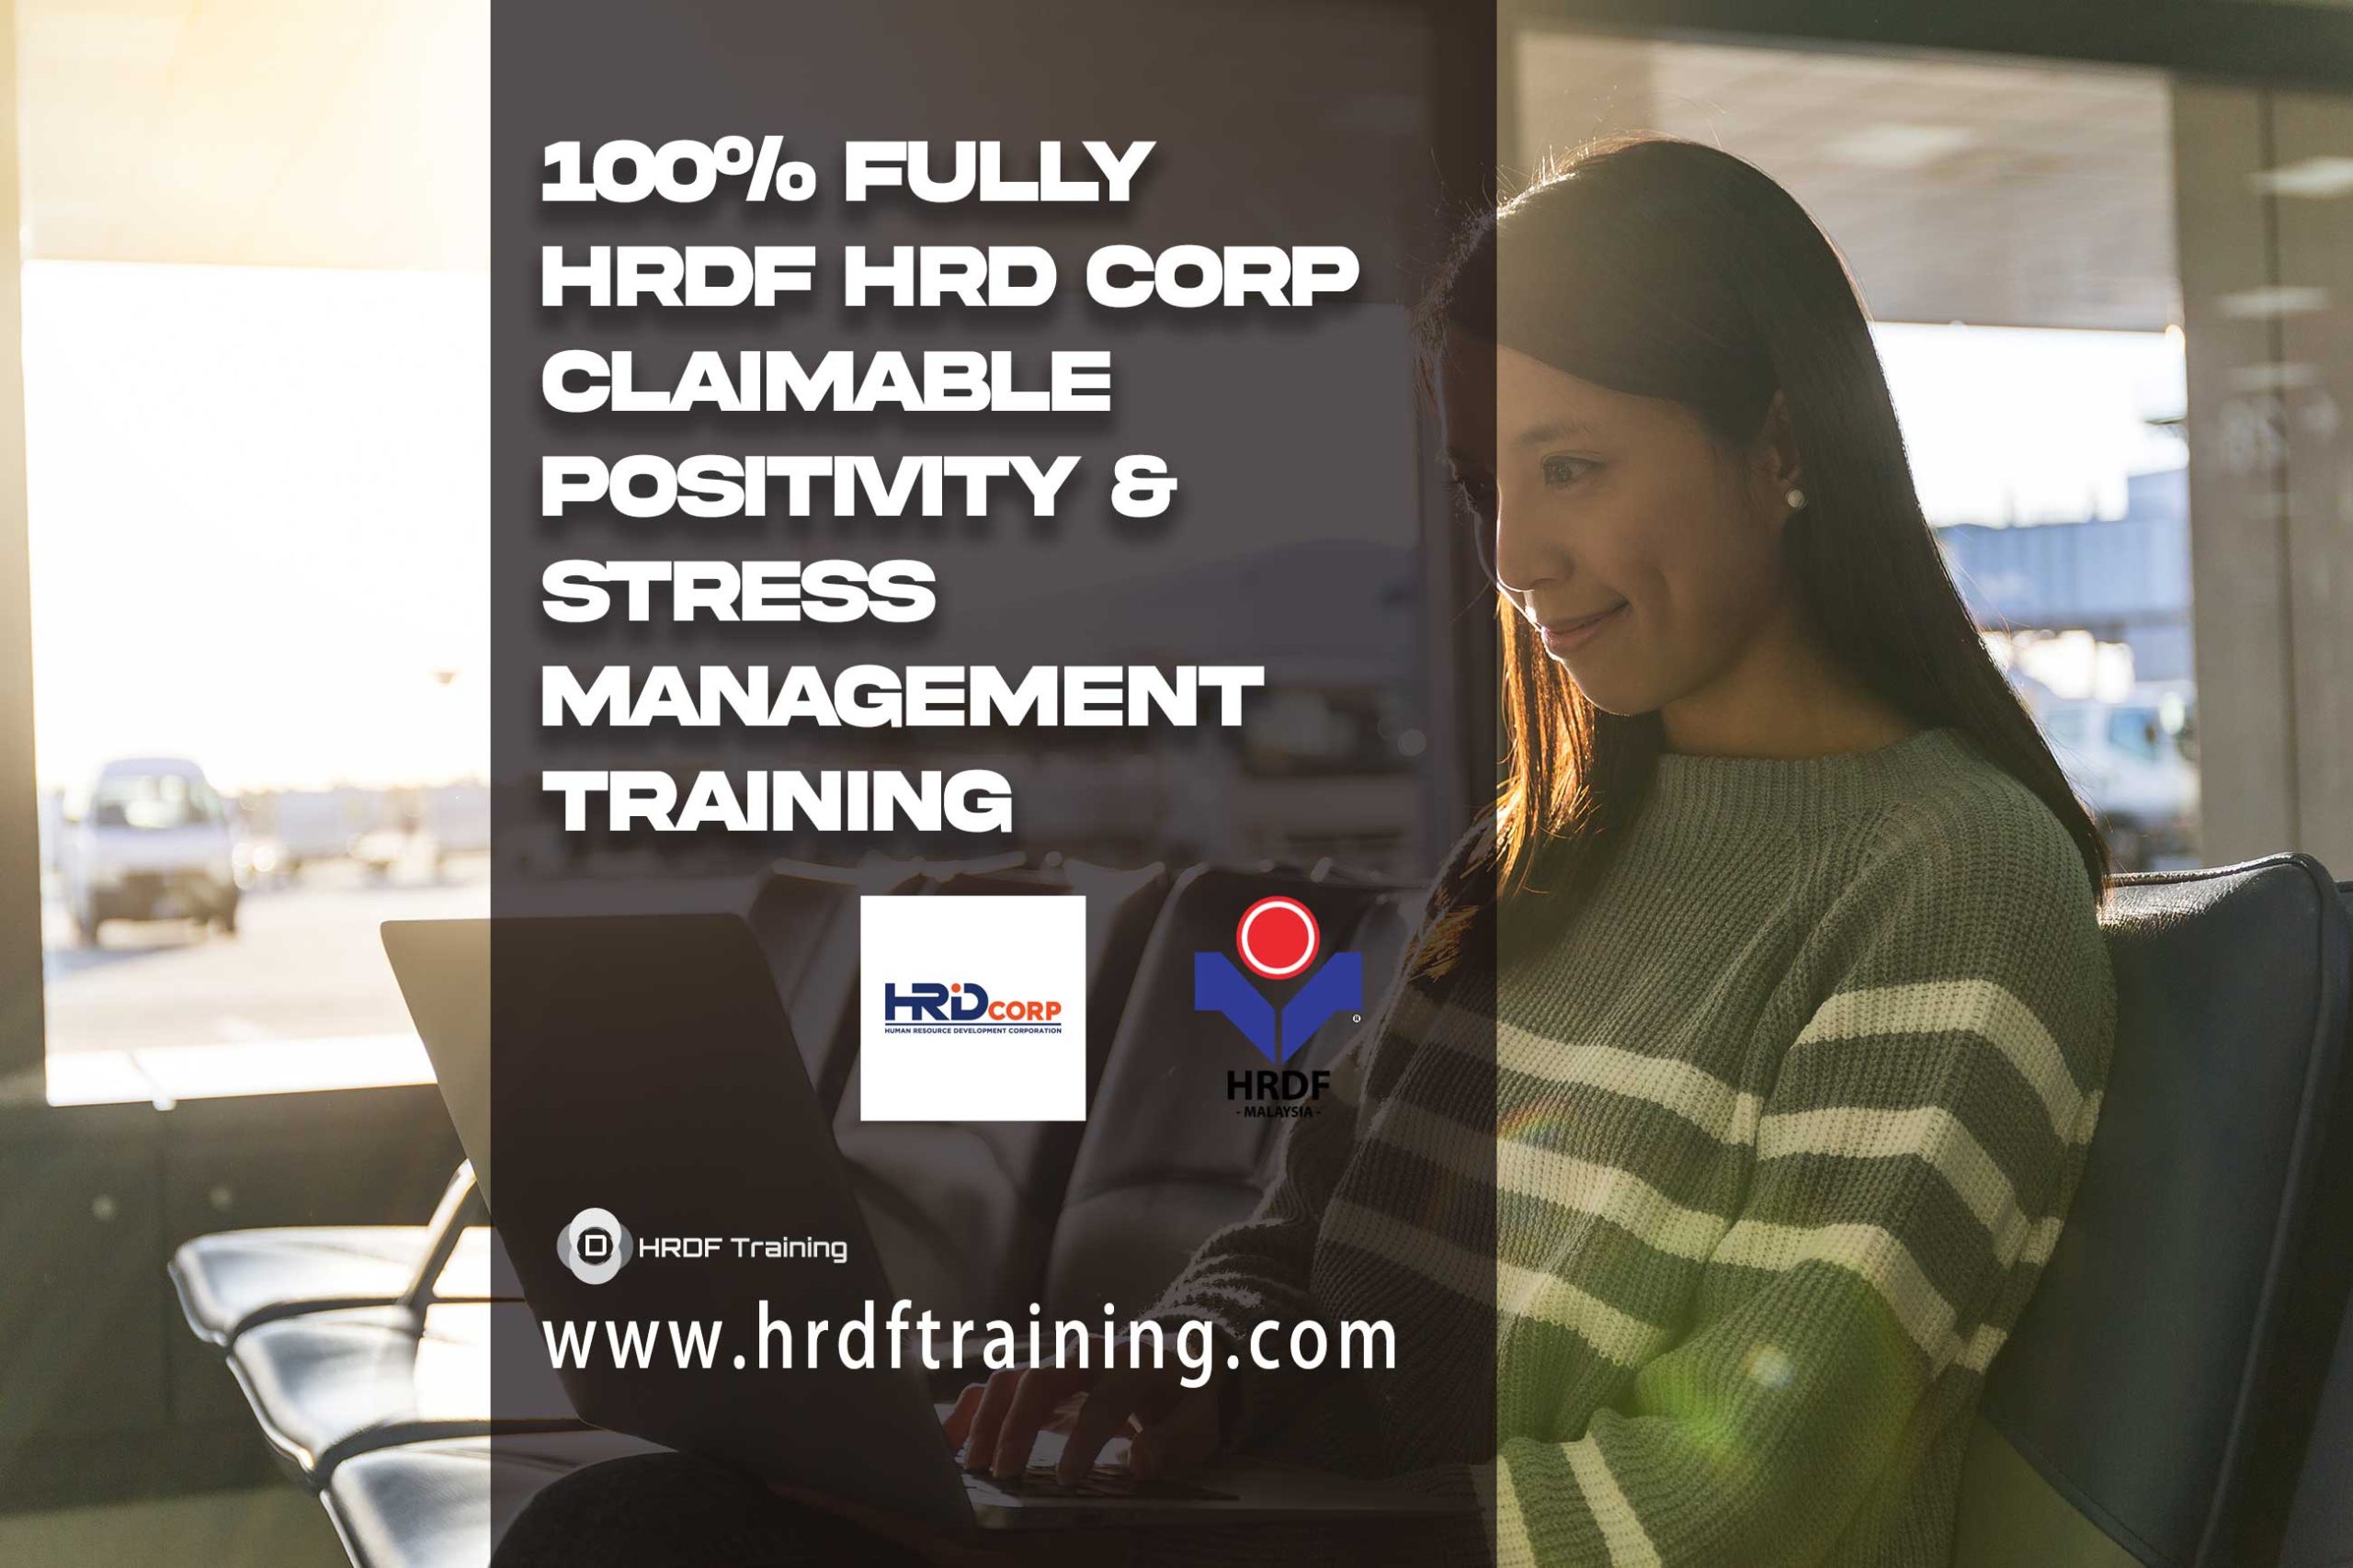 HRDF-HRD-Corp-Claimable-Positivity-&-Stress-Management-Training